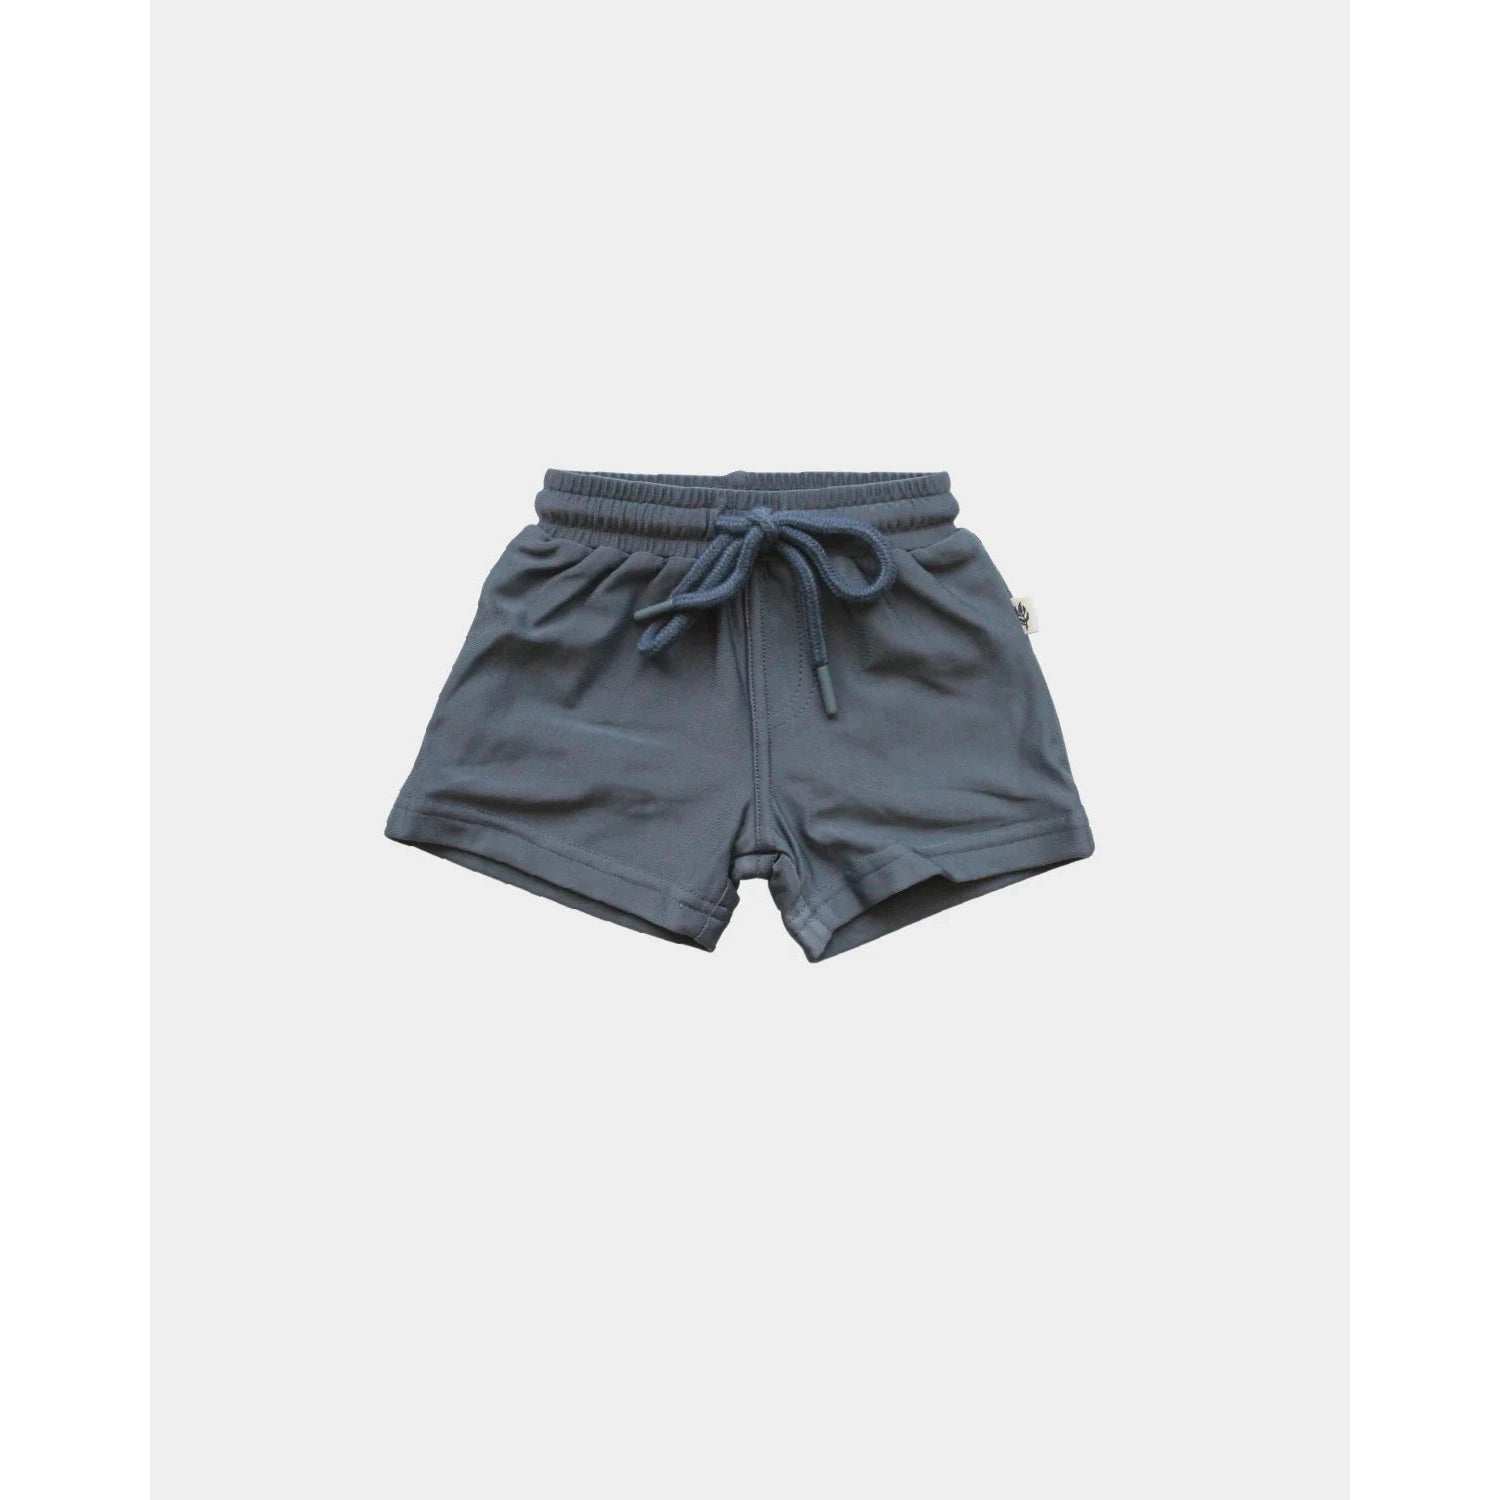 Baby Sprouts Dusty Blue Boy's Swim Shorts-Baby Sprouts-Little Giant Kidz